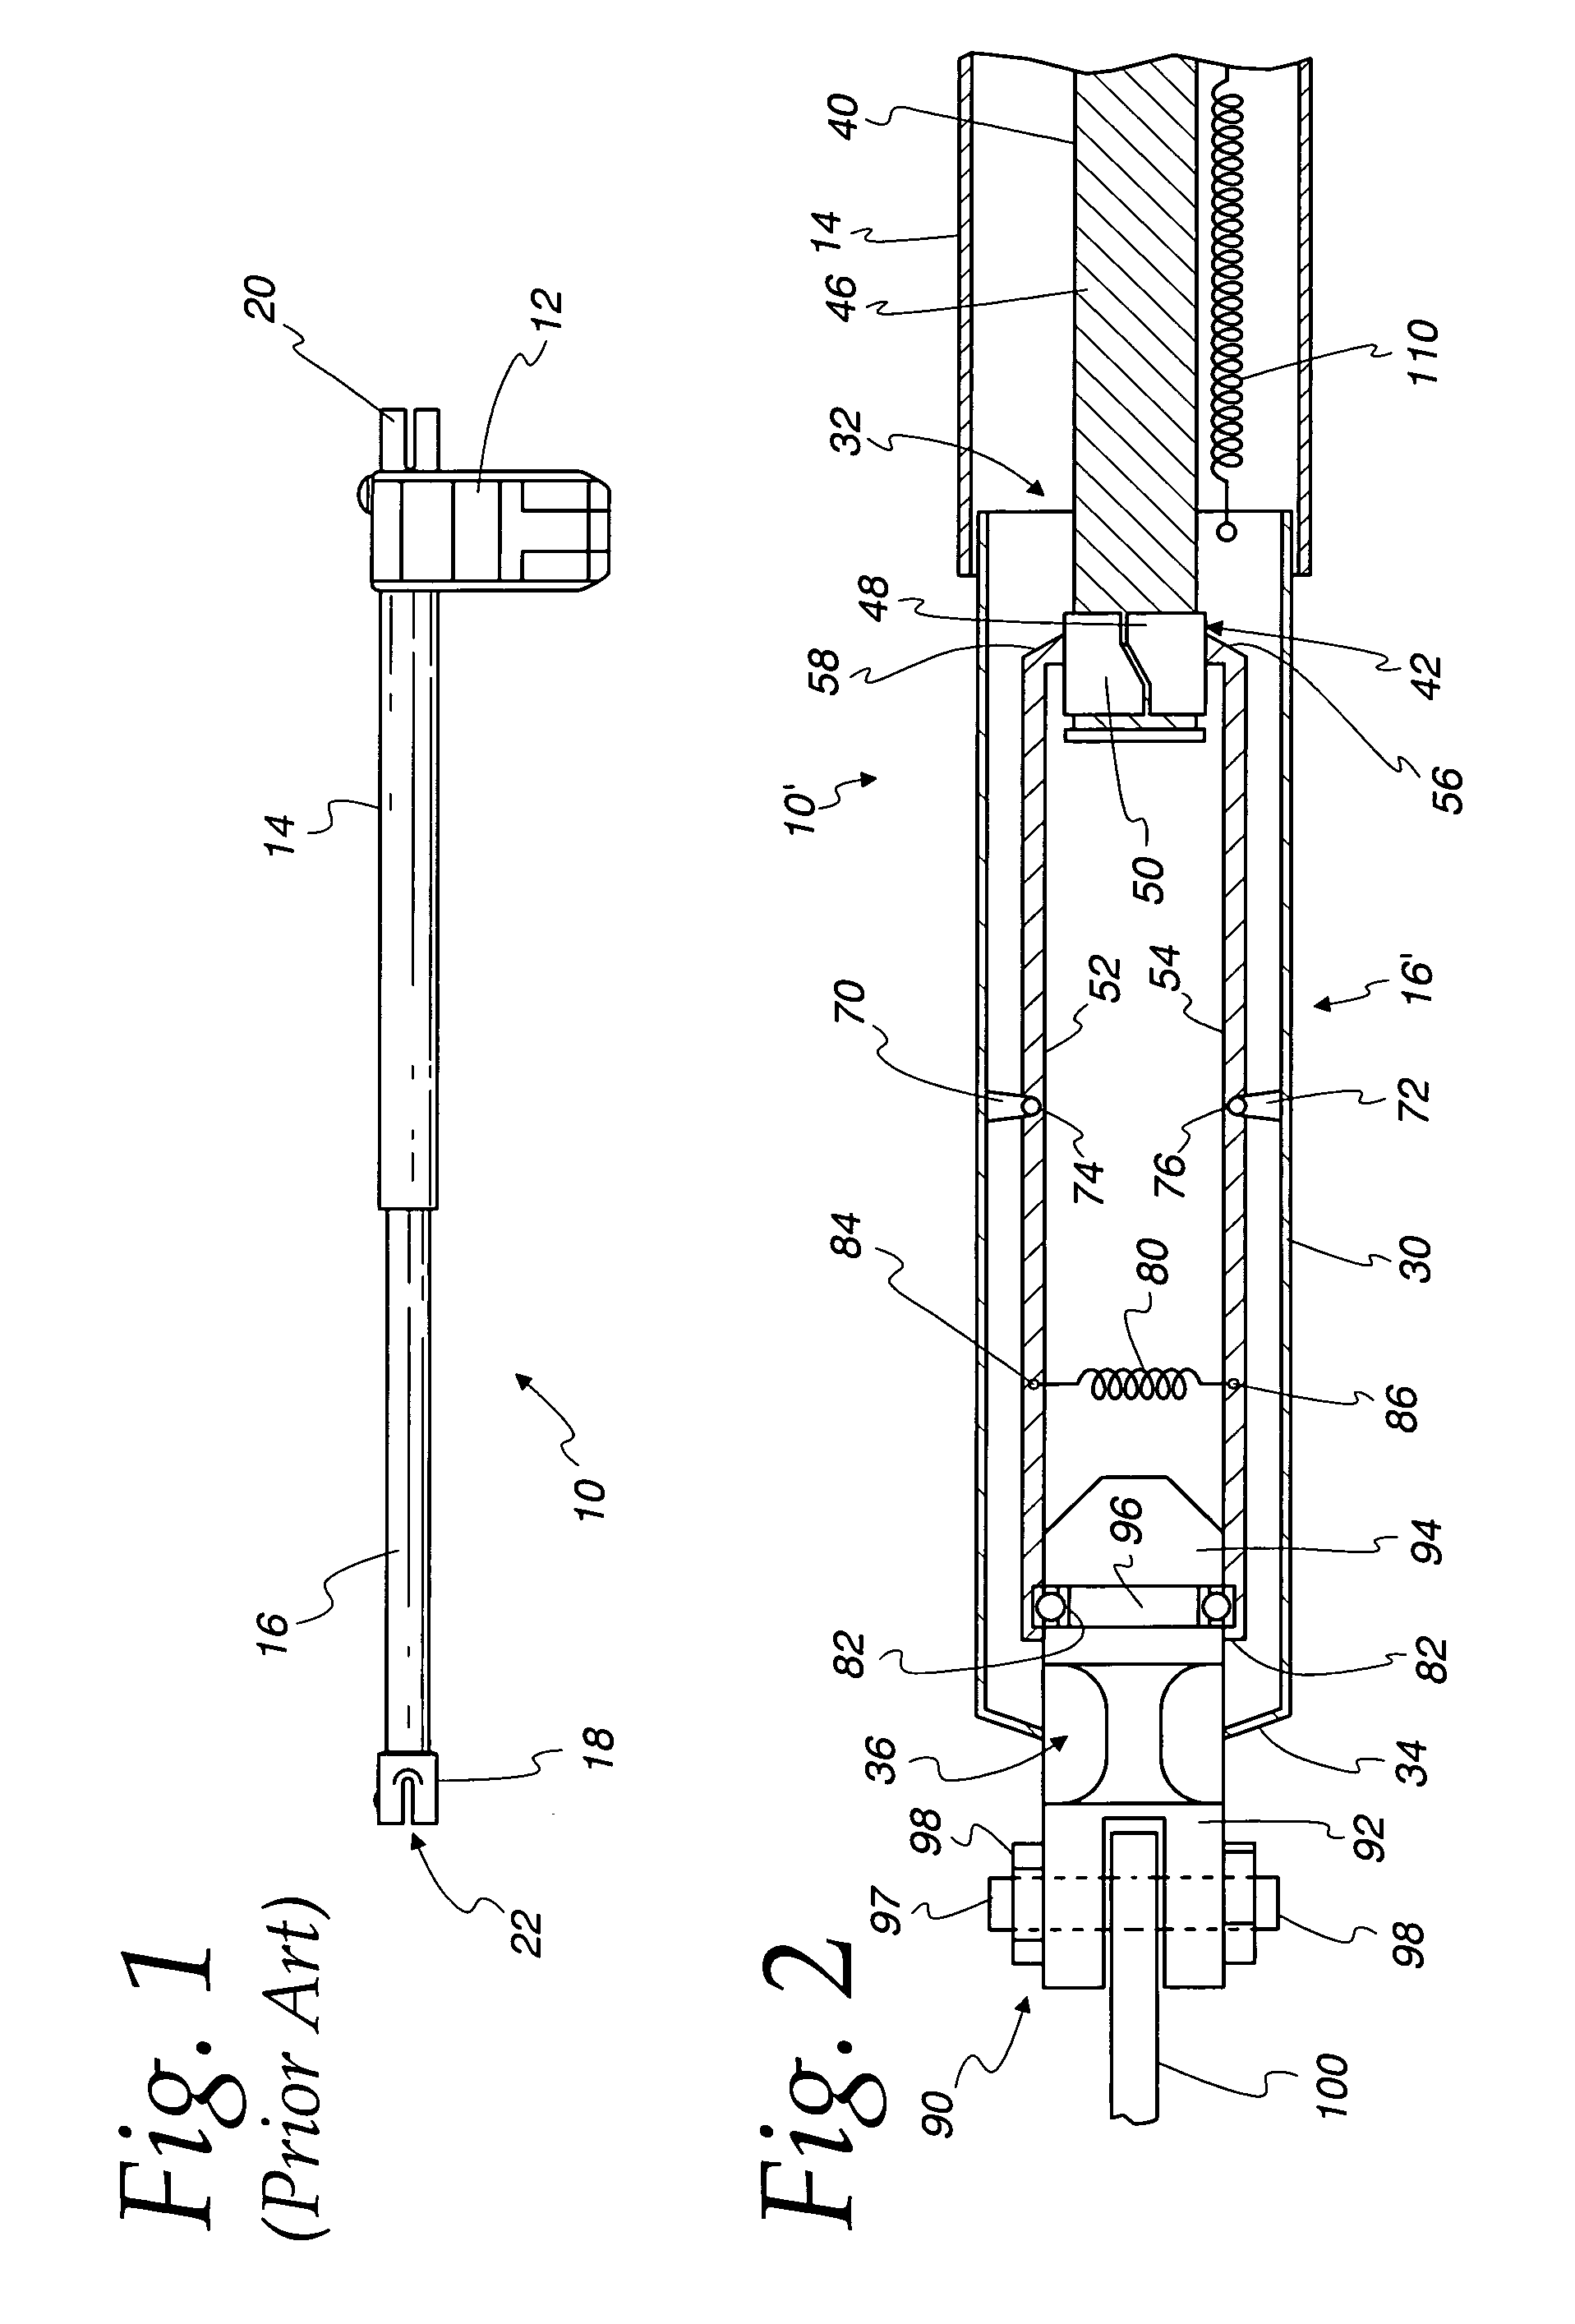 Method and apparatus for breakaway mounting of security gate to drive mechanism